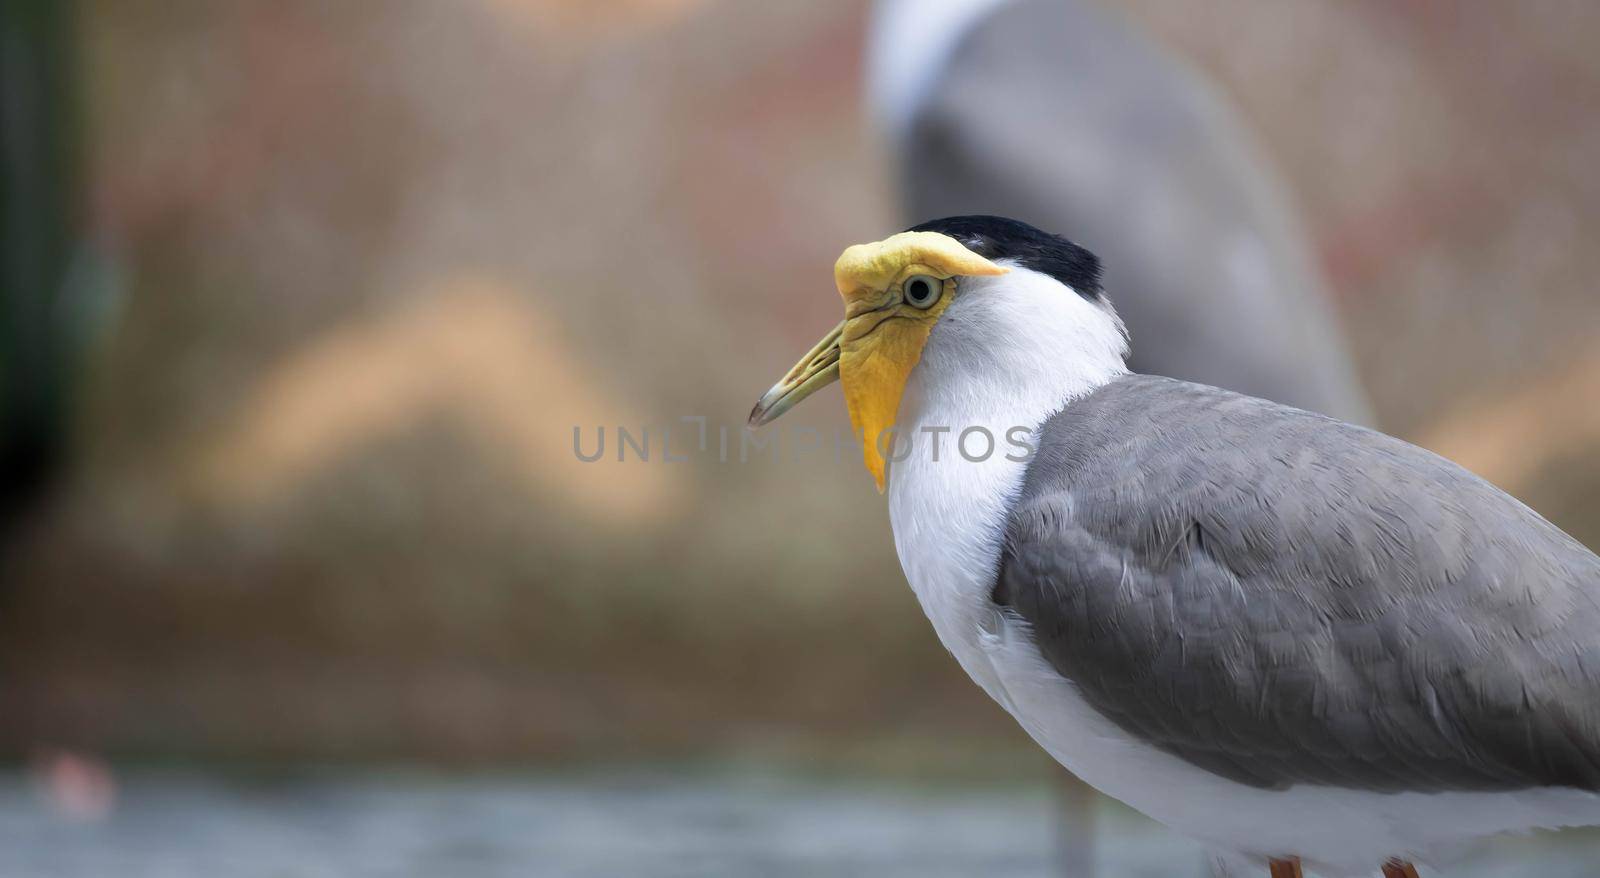 A Masked lapwing (Vanellus miles), commonly known in Asia as derpy bird or durian faced bird